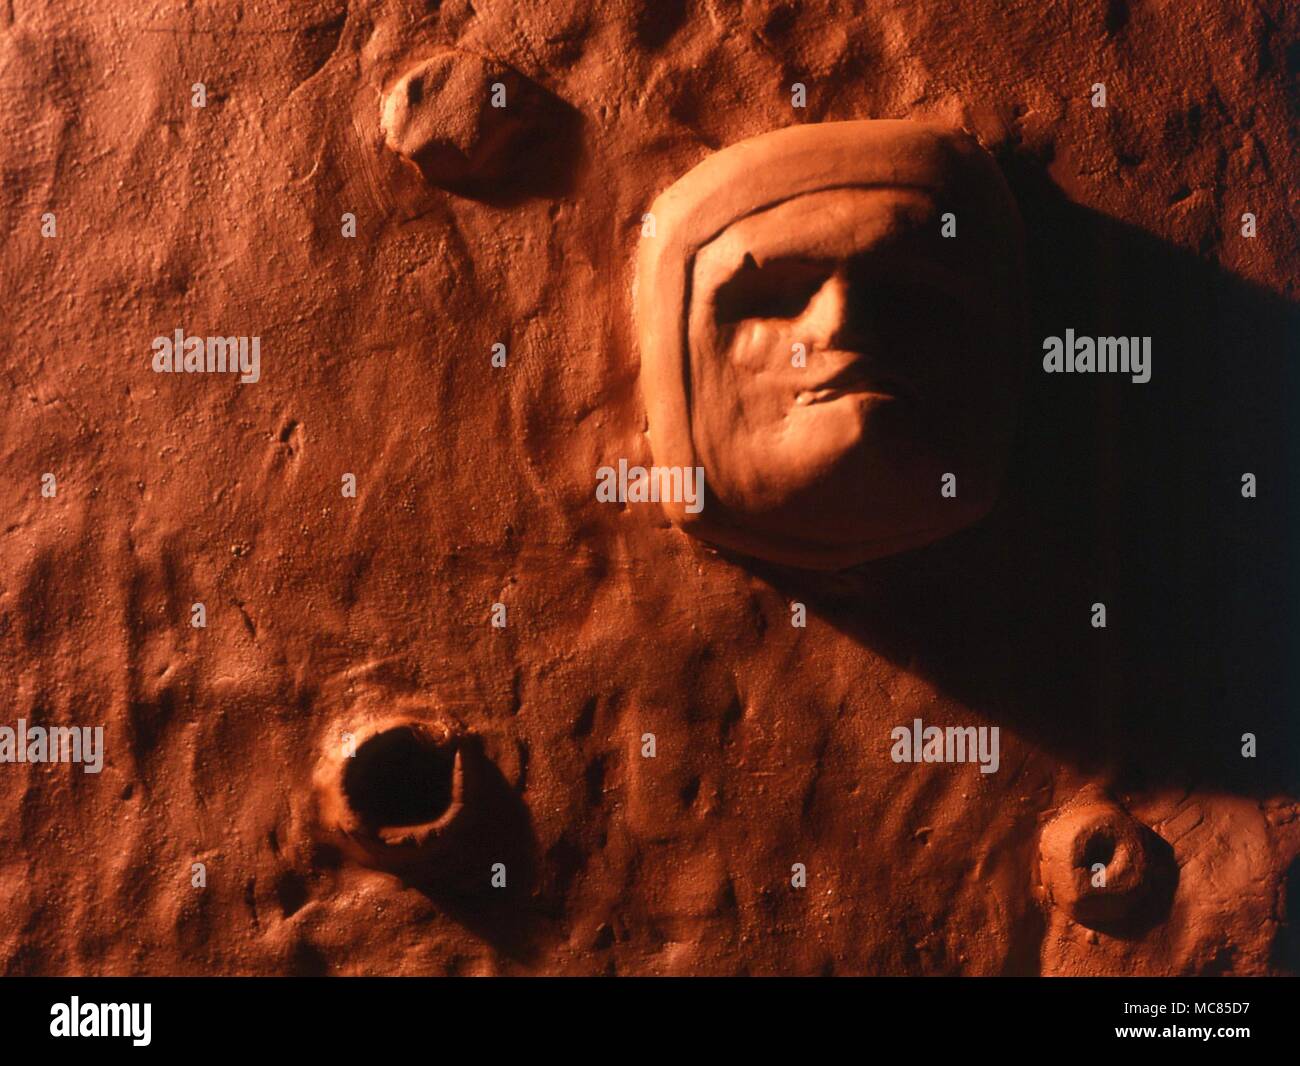 Strange phenomena. The face on Mars - detailed reconstruction, based on the NASA spacecraft photographs of the artificial structures on the northern desert regions of Mars. The original photographs were taken from 1,162 miles above mars - the face itself is about 1 mile across. Stock Photo